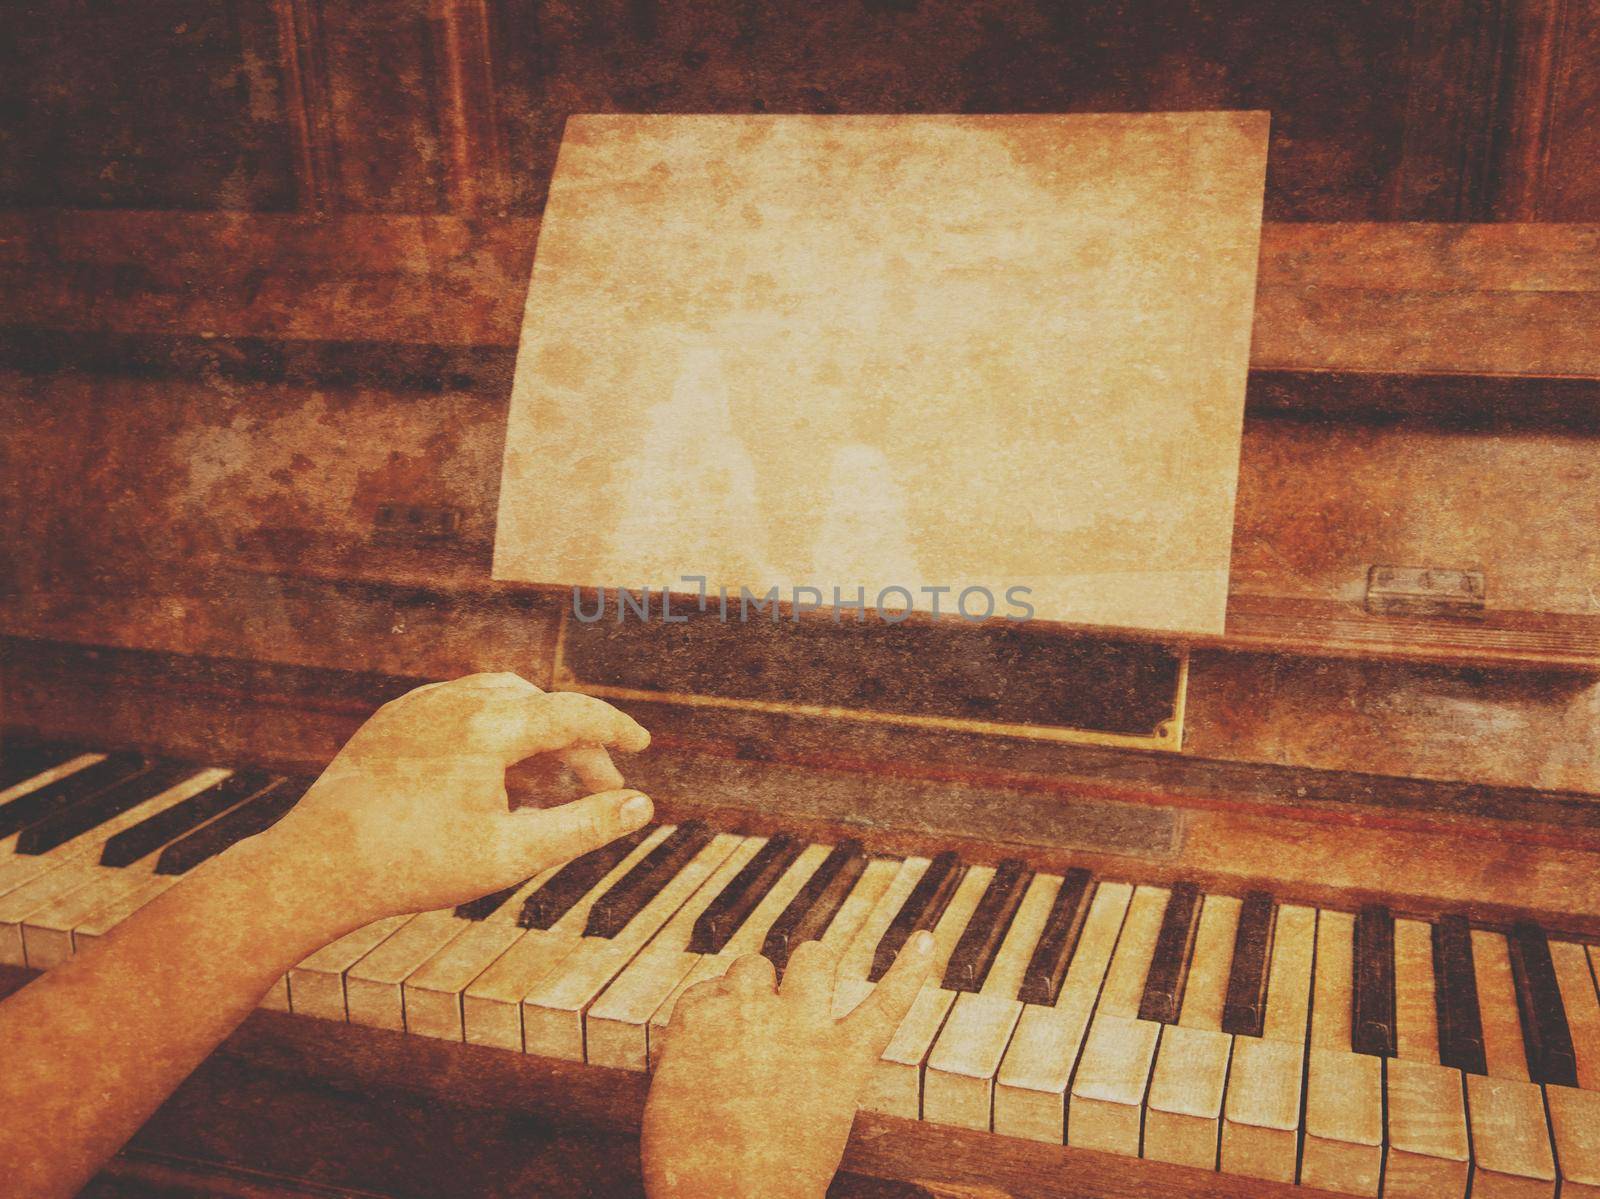 Child plays on the retro piano, on the desk empty blank space for text. Vintage image